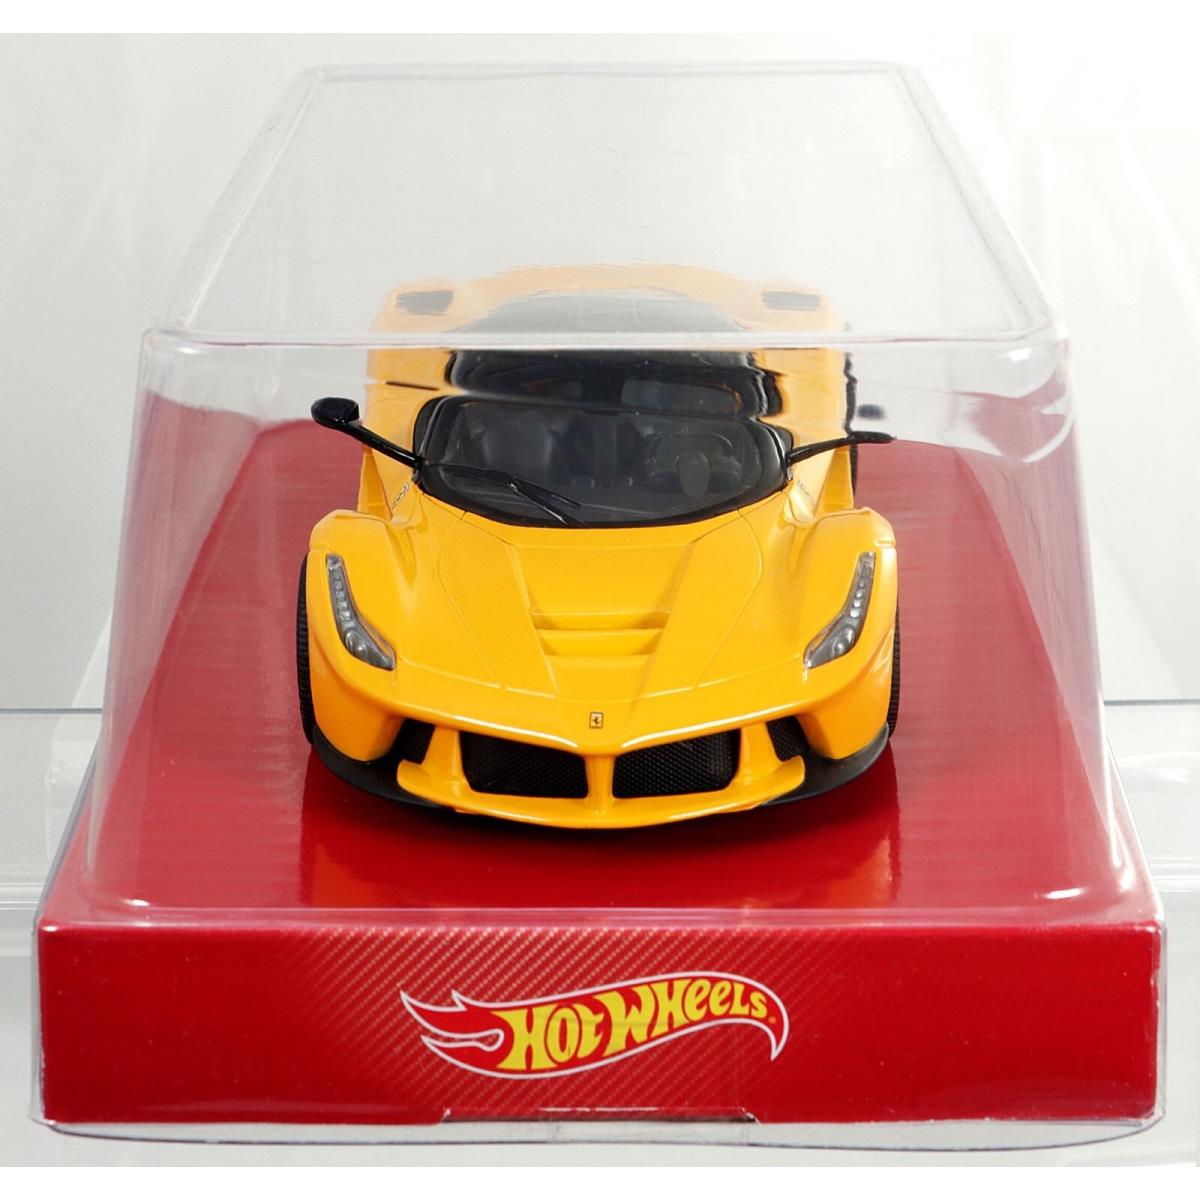 Hot Wheels La Ferrari BLY63 Never Removed From Display Box 2014 Yellow 1:24